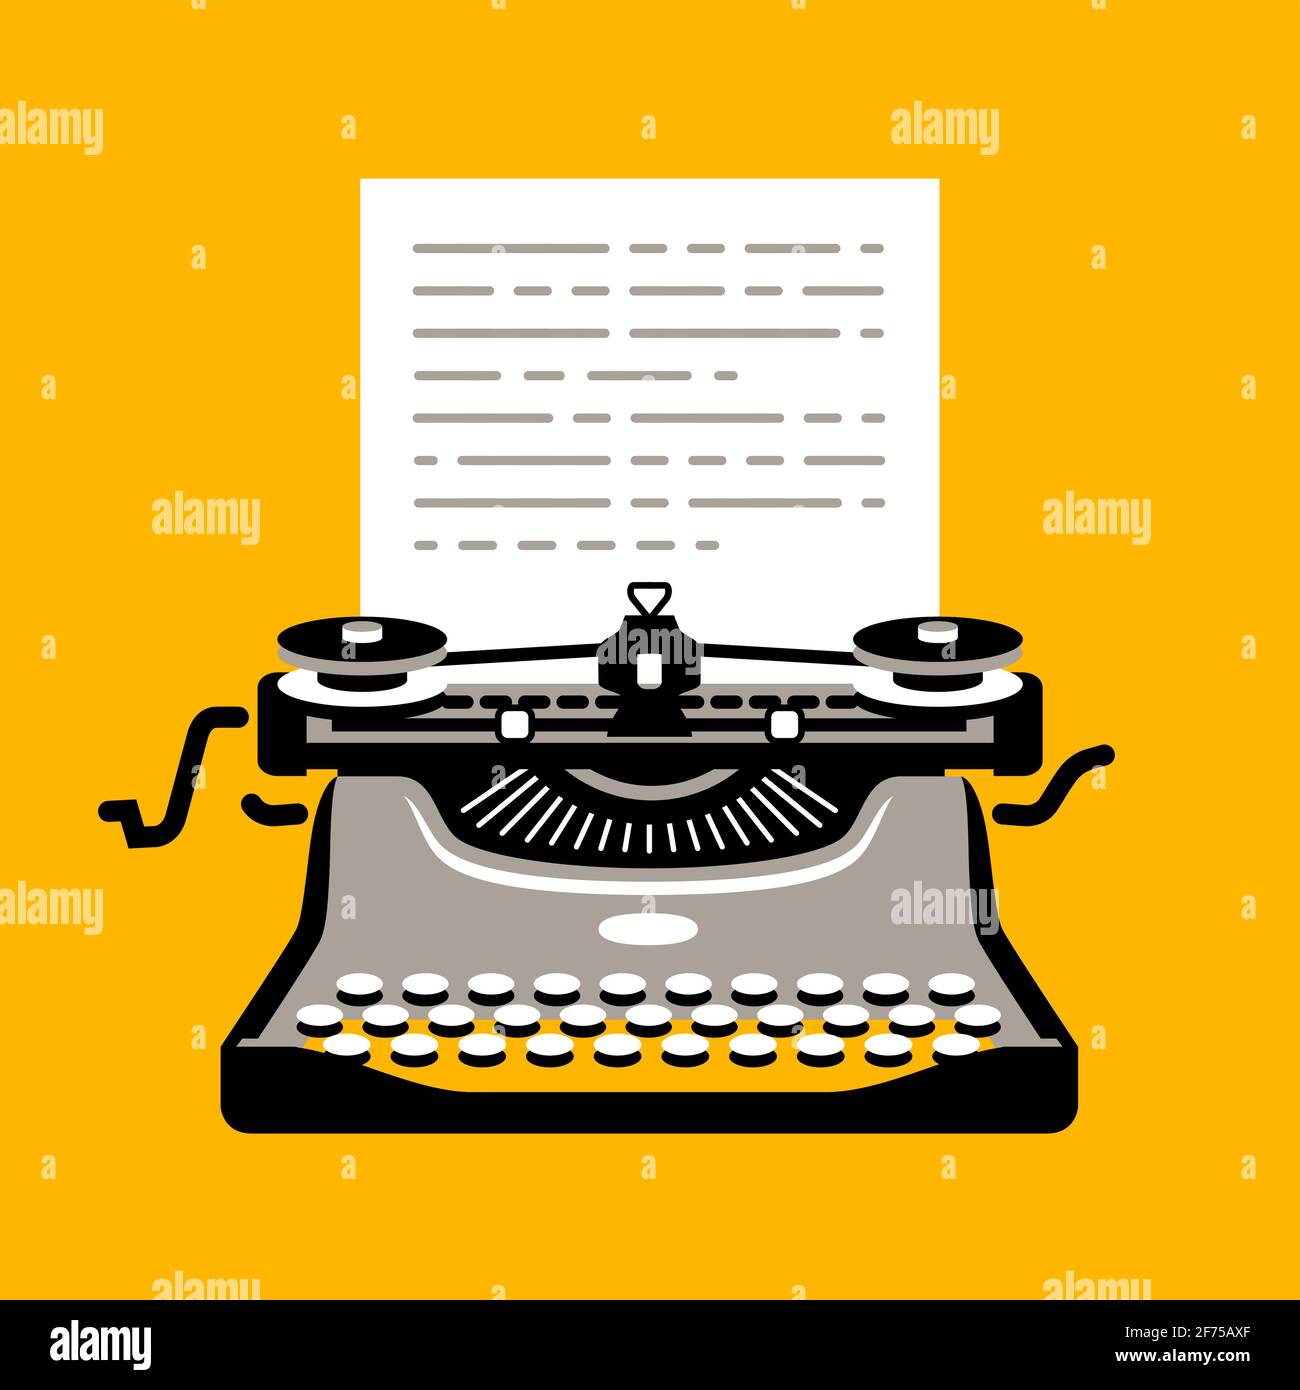 Retro typewriter with sheet of paper. Flat design style modern vector illustration Stock Vector